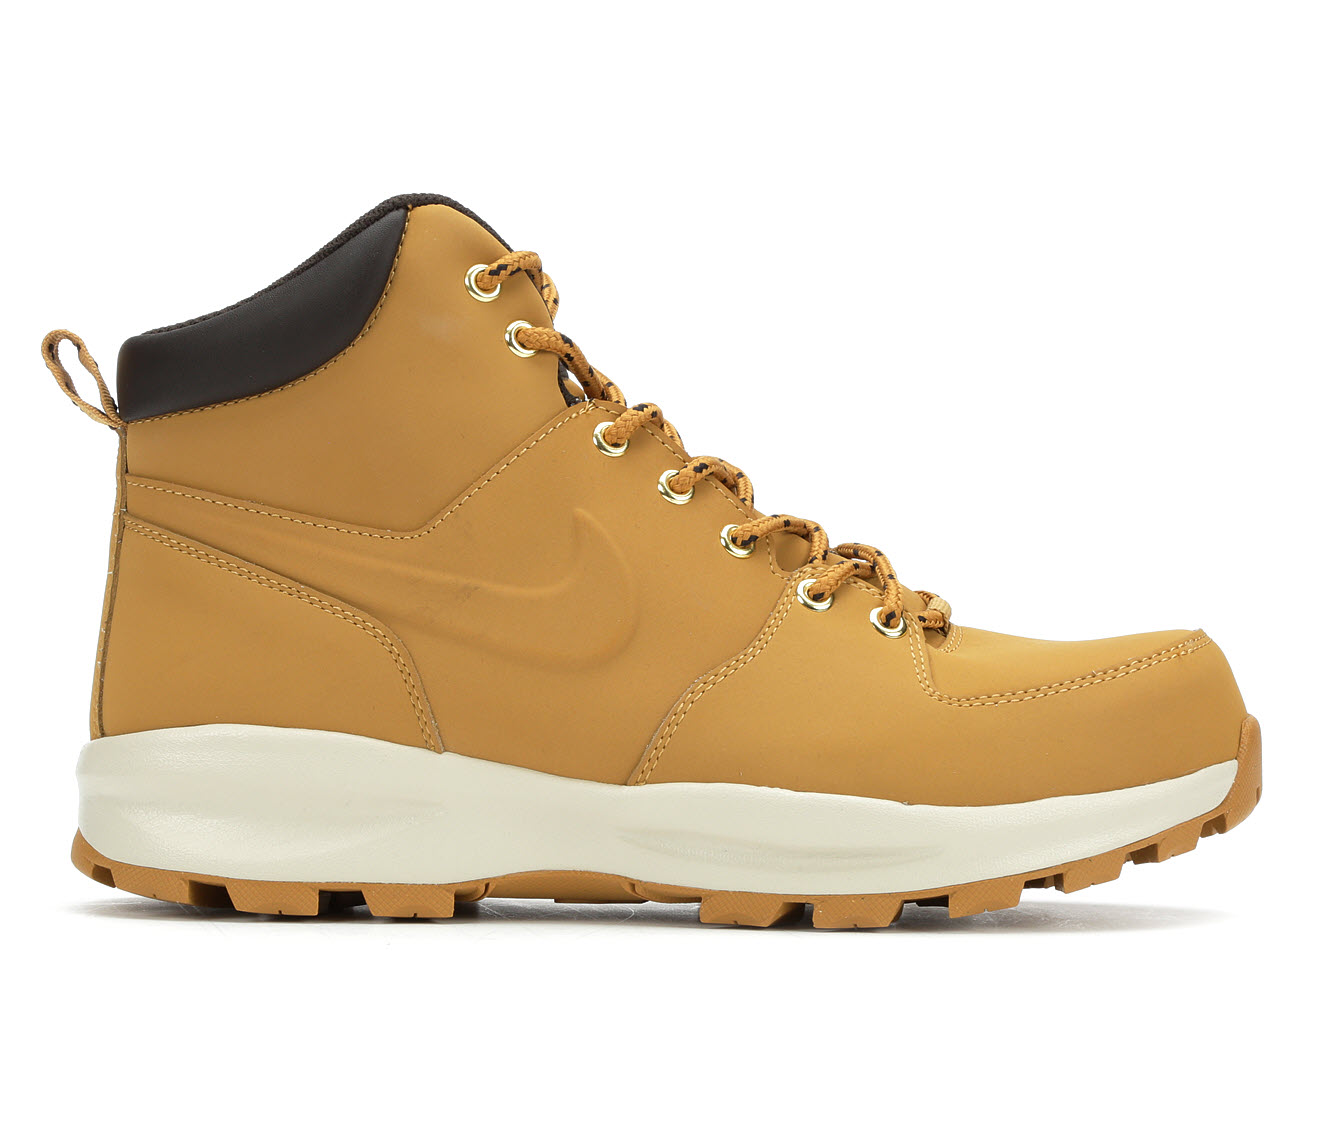 Shop Now For The Nike Manoa Leather Lace-Up Men's Boot (Beige - Size 11 -  Leather) | AccuWeather Shop